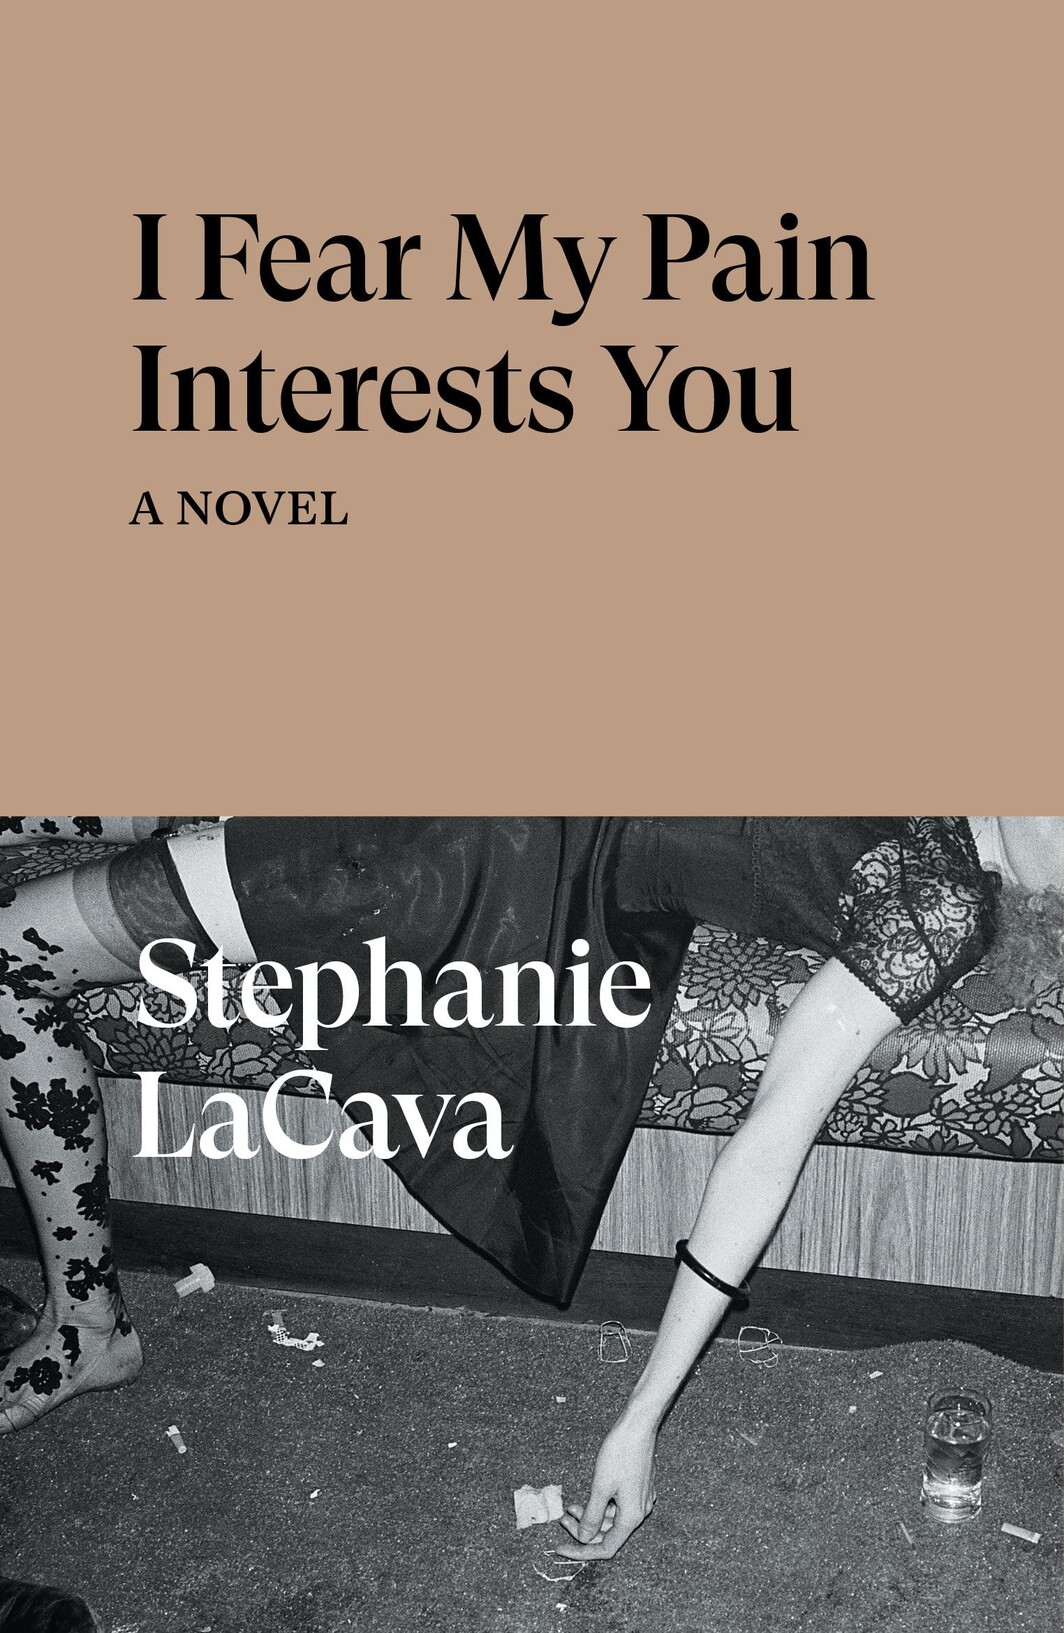 The cover of I Fear My Pain Interests You